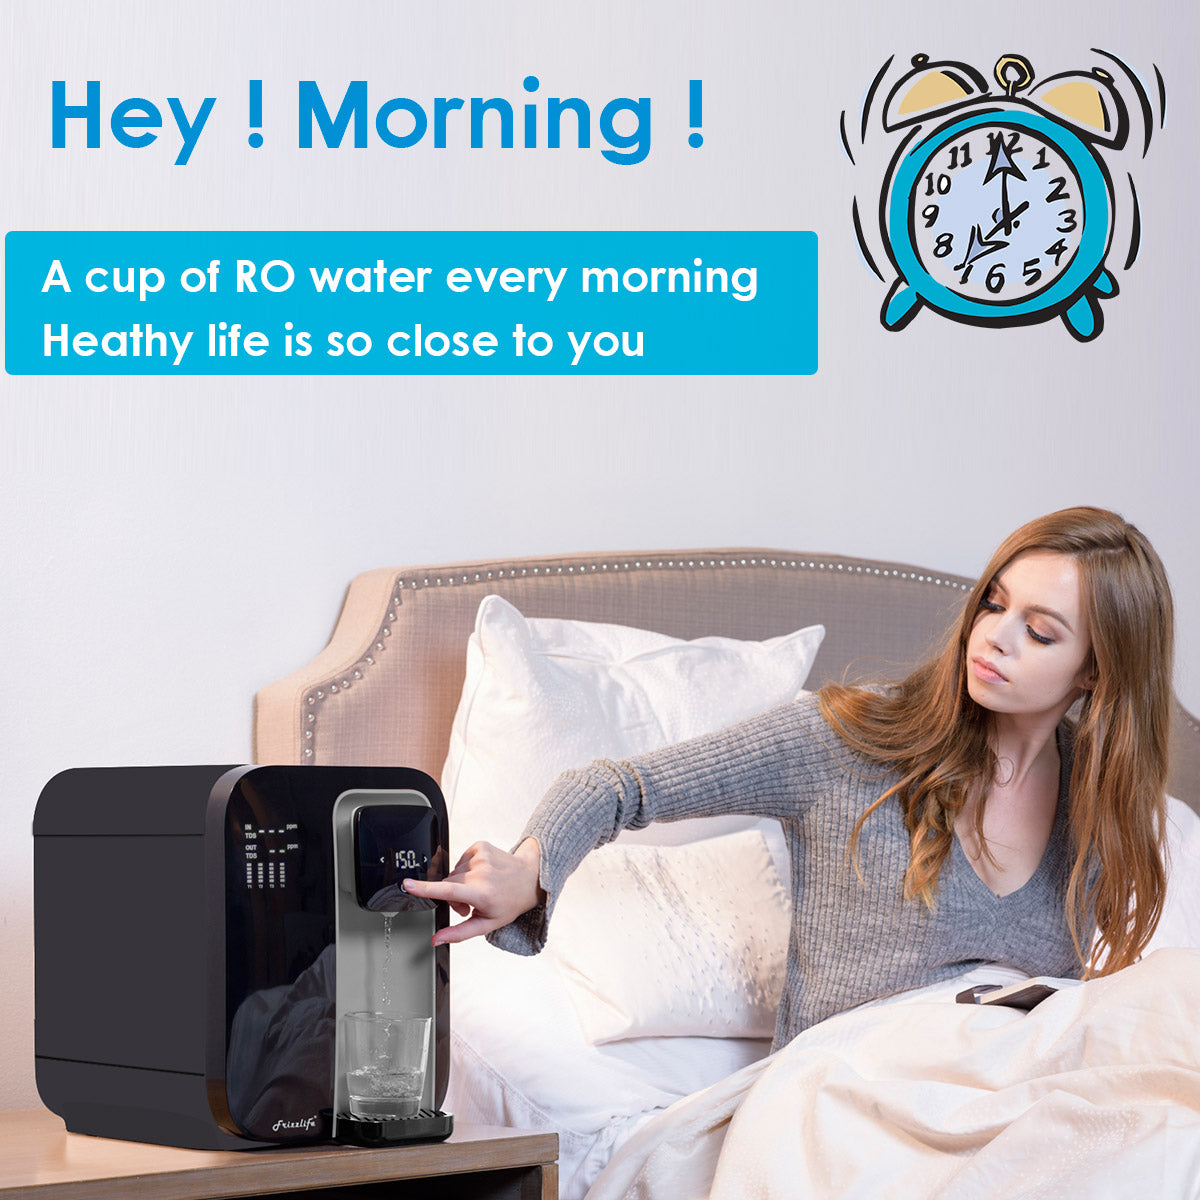 Wake up your mind with Frizzlife RO water